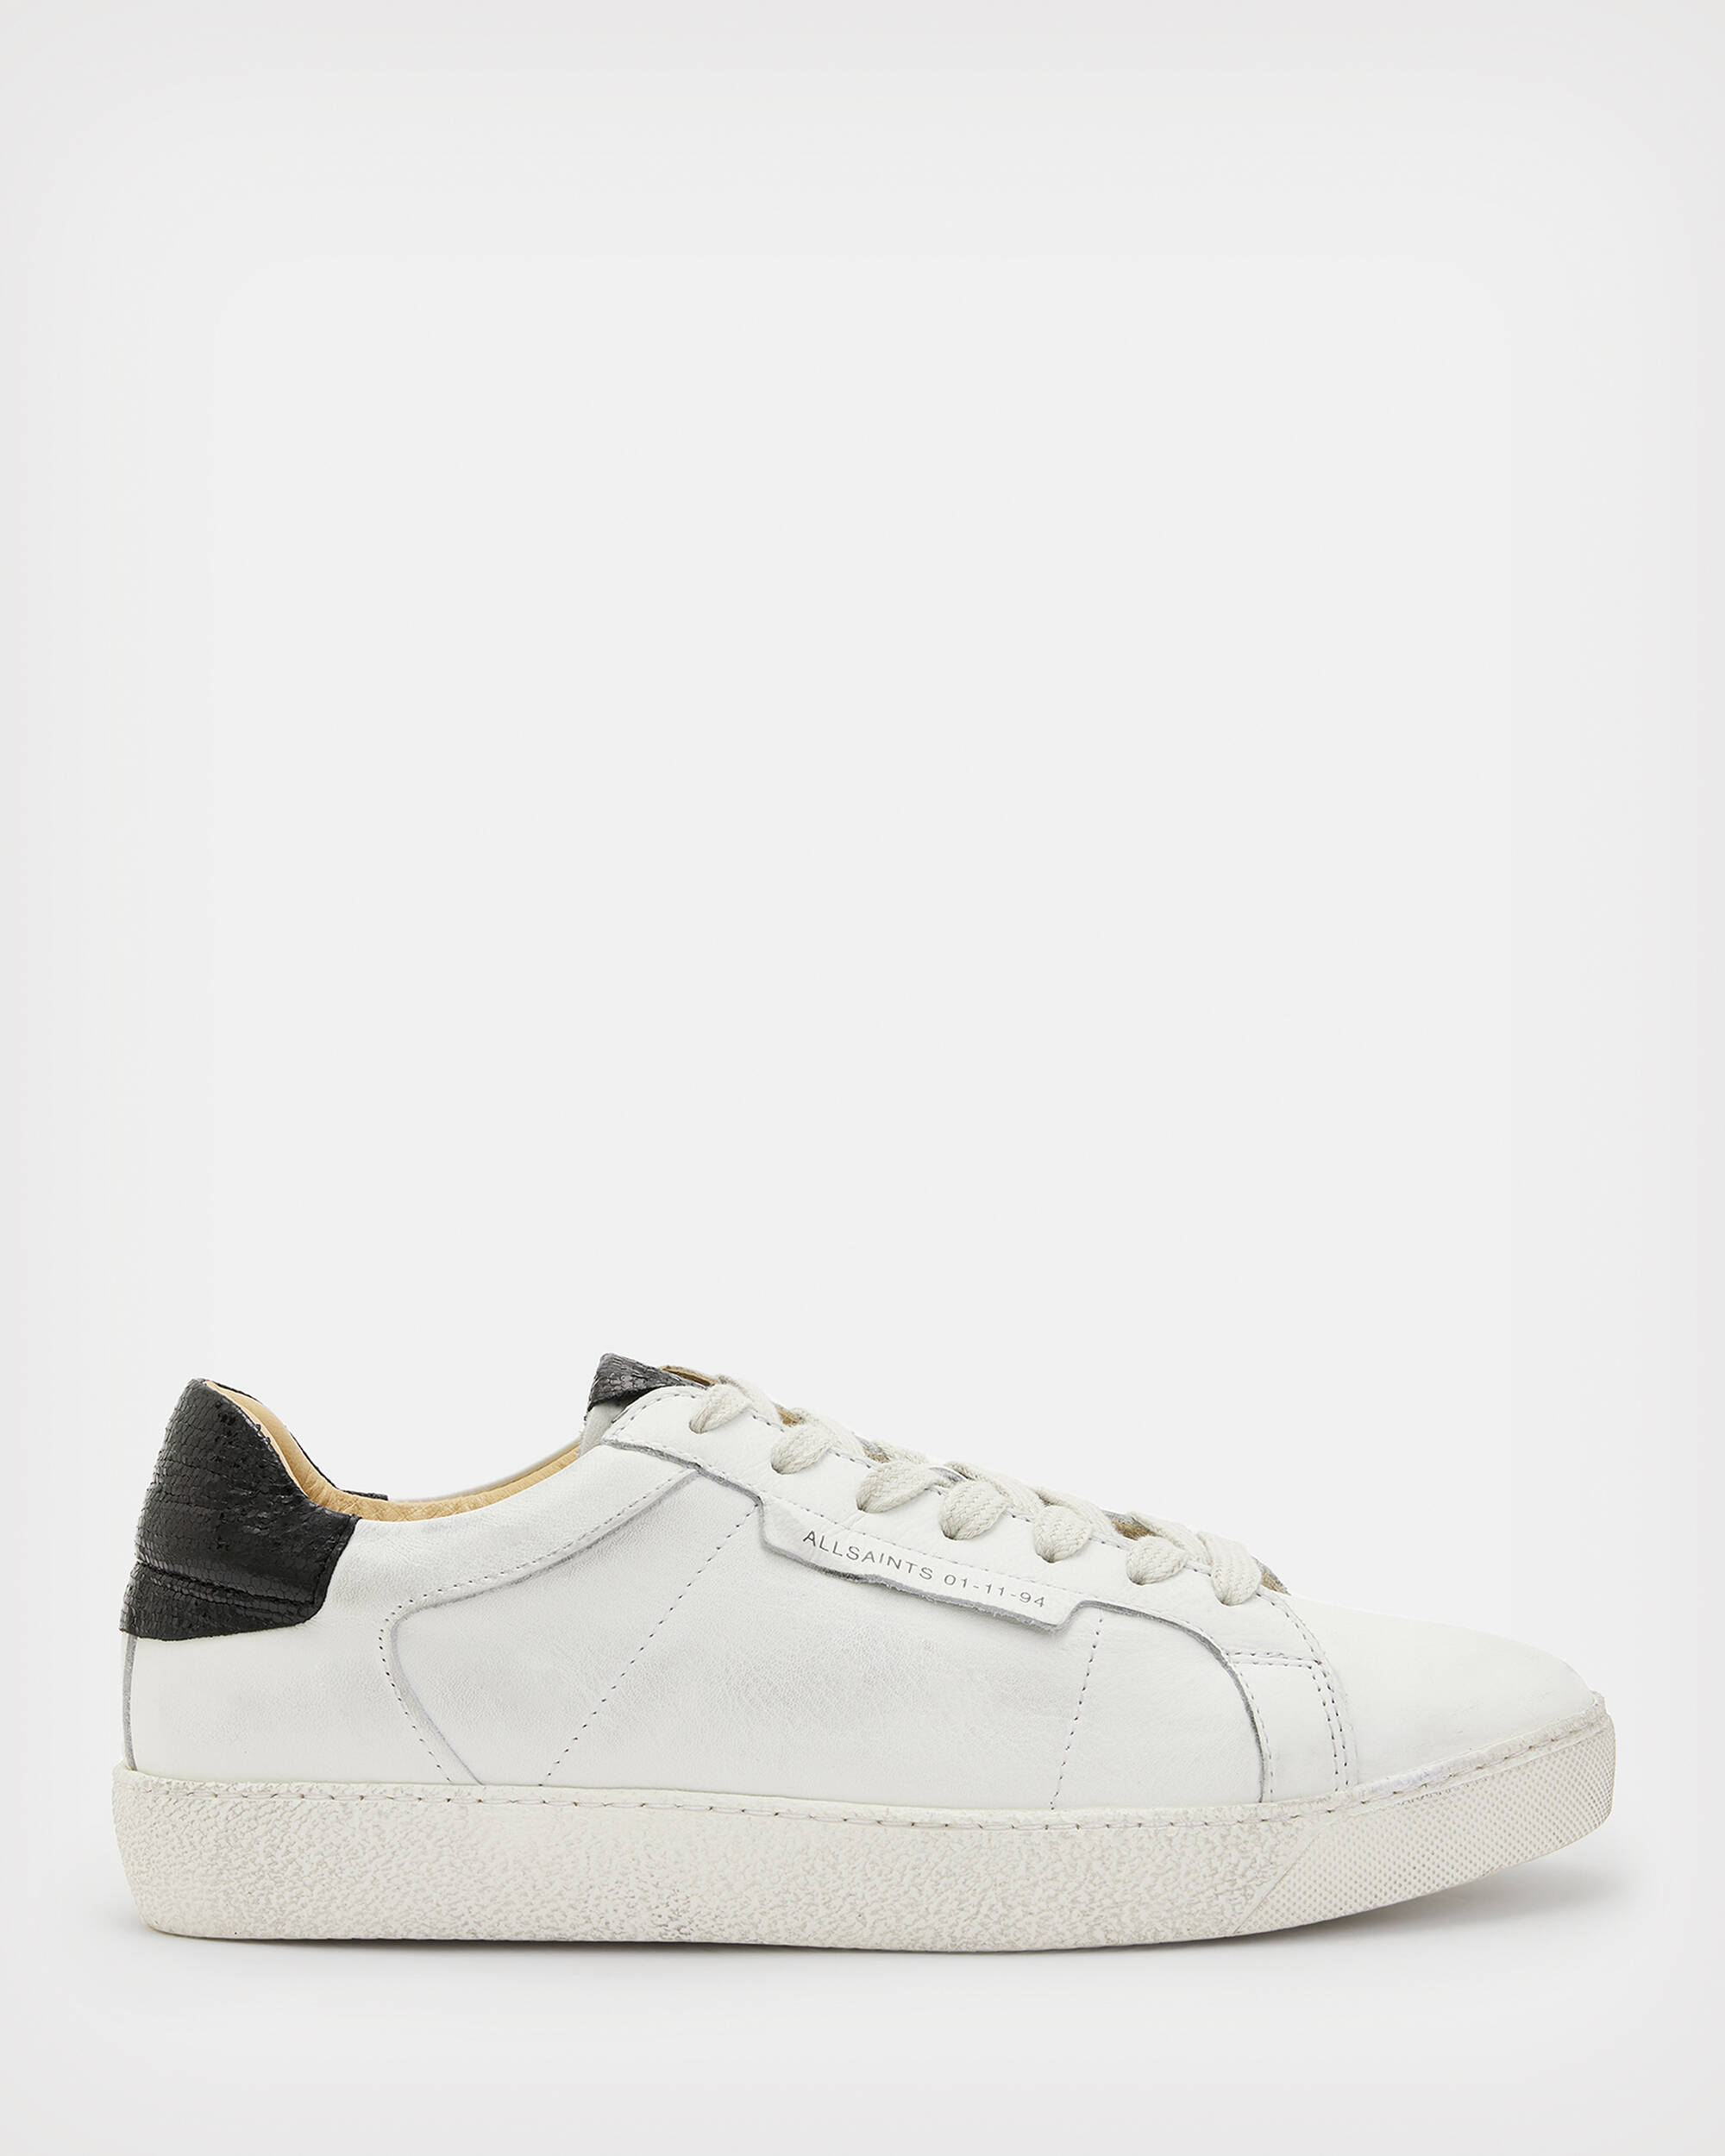 Sheer Leather Sneakers  large image number 1